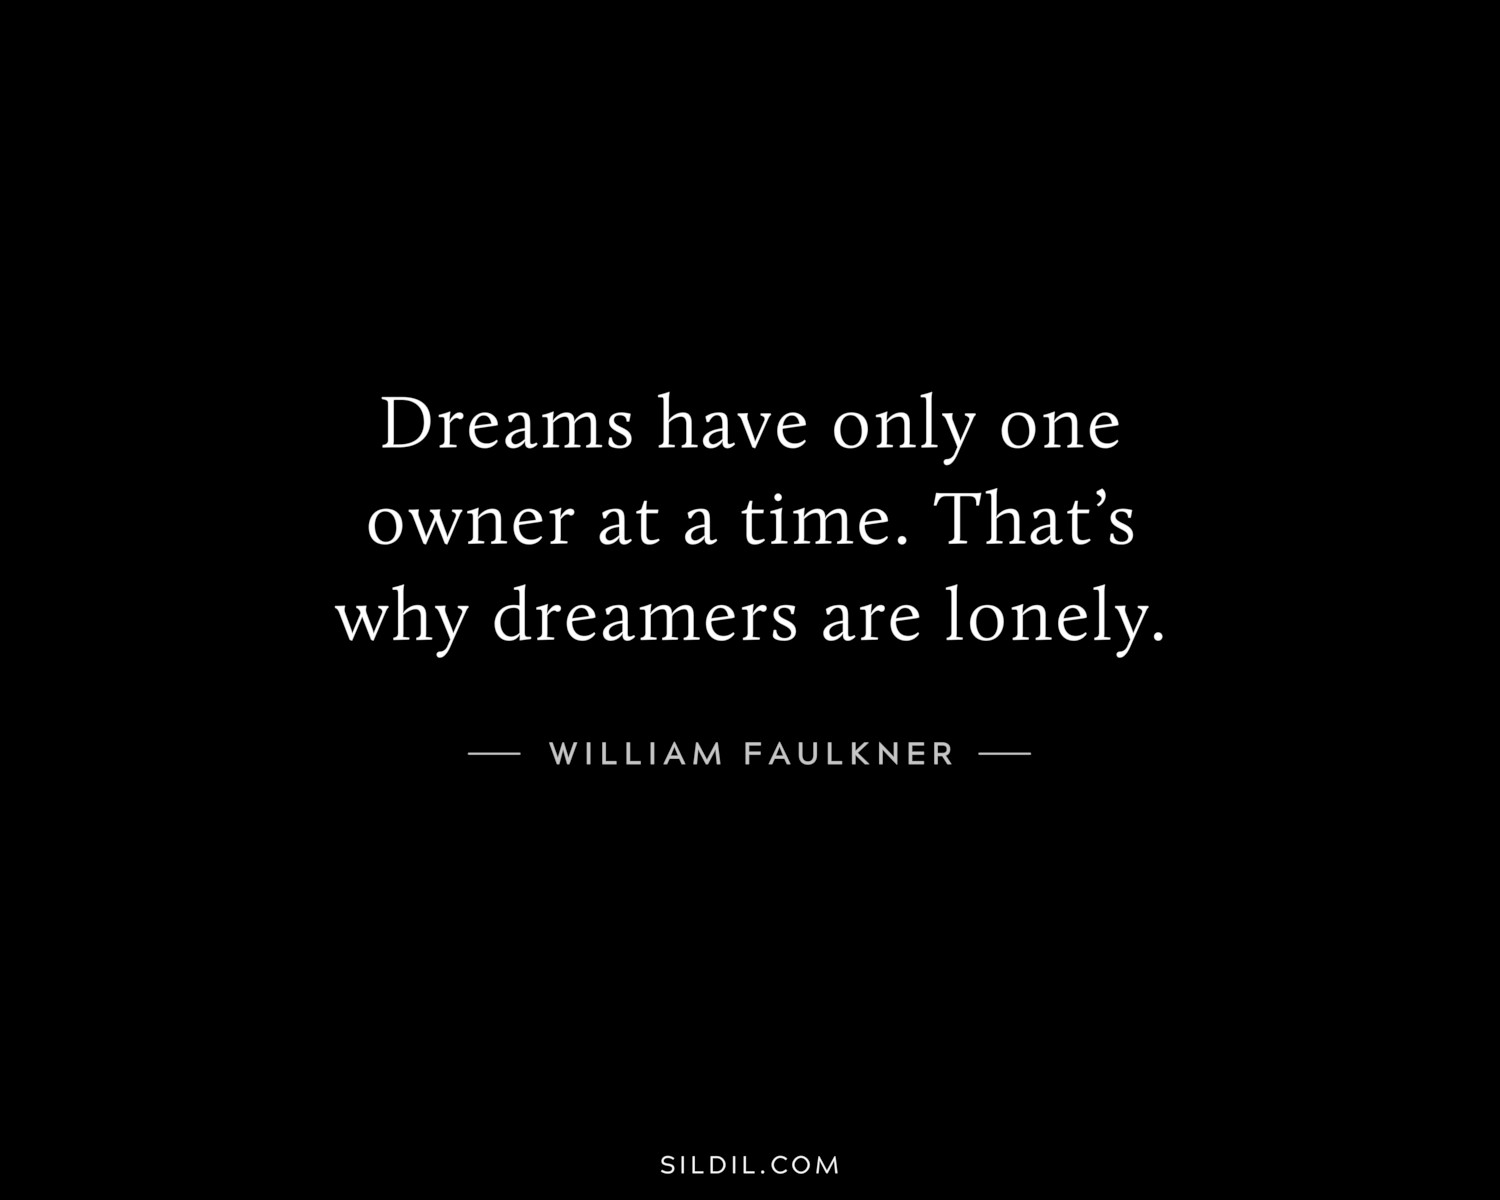 Dreams have only one owner at a time. That’s why dreamers are lonely.